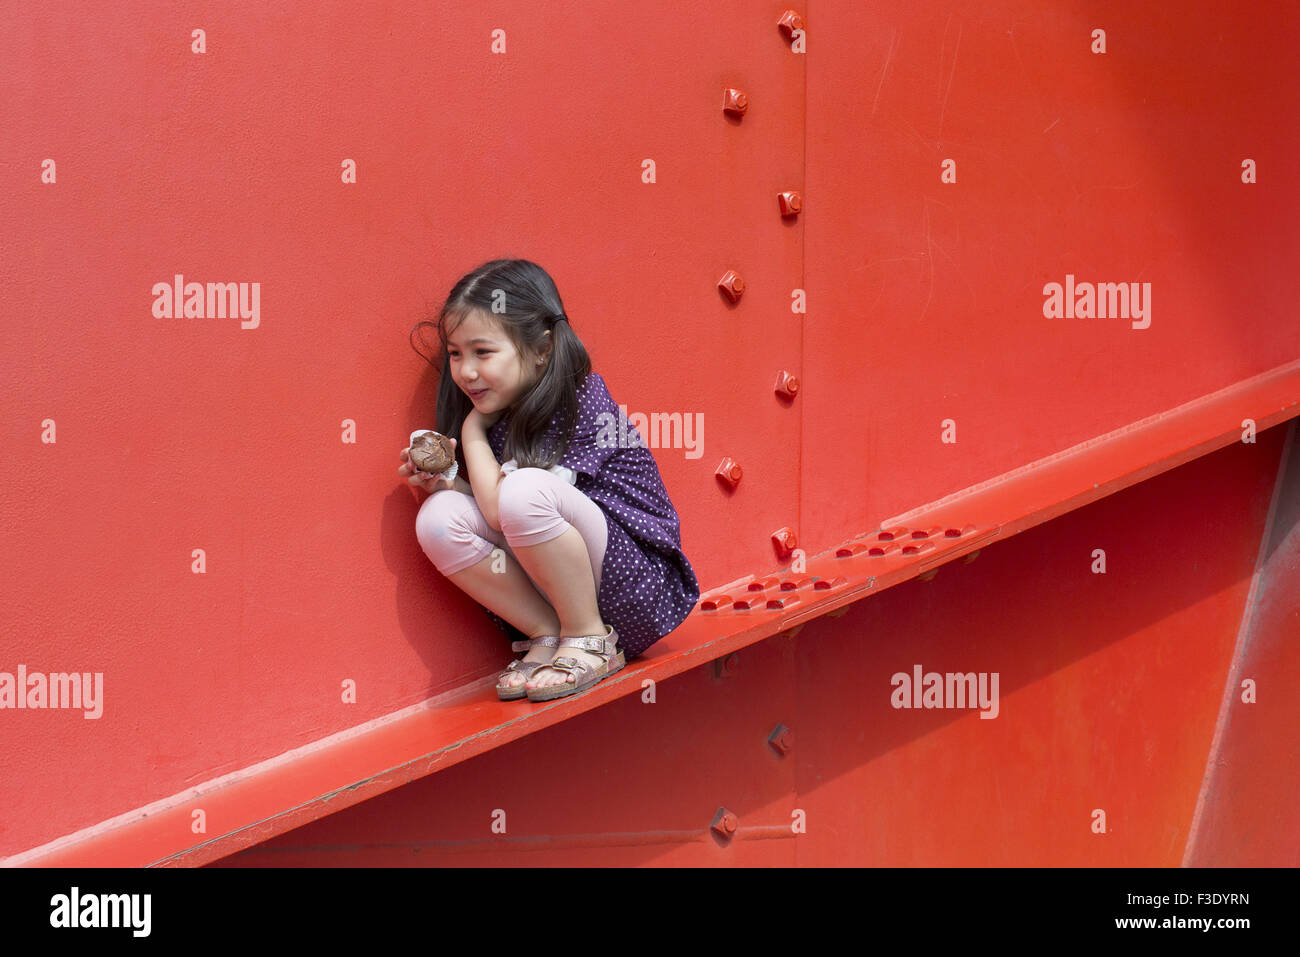 Little girl perched on ledge surreptitiously eating cupcake Stock Photo